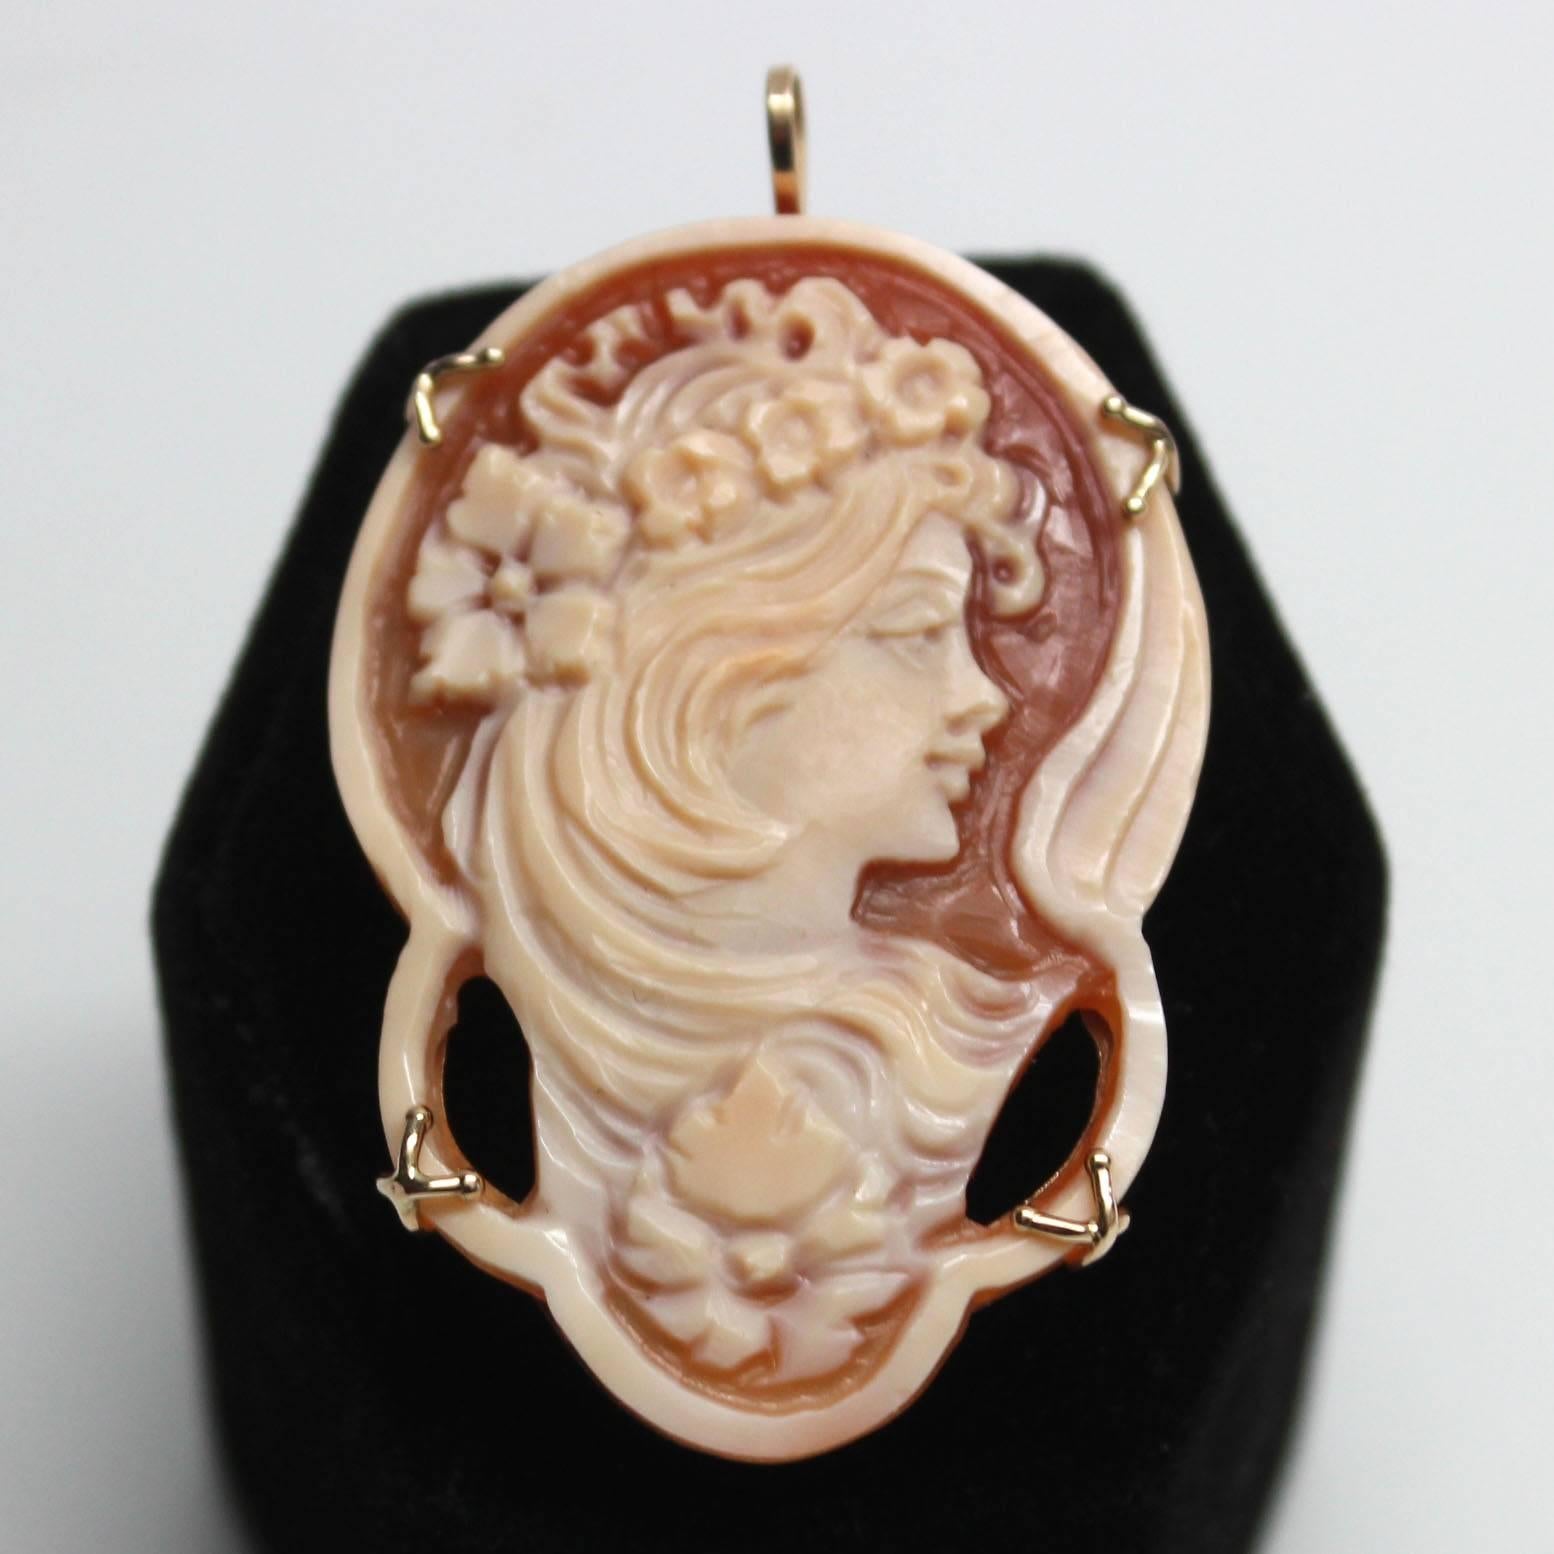 The Scognamiglio family name is synonymous with cameos. They opened a small factory in 1857 in Italy and the fine art of cameo and coral carving has been passed down in the family for six generations. This cameo dates from the 1970's, it is